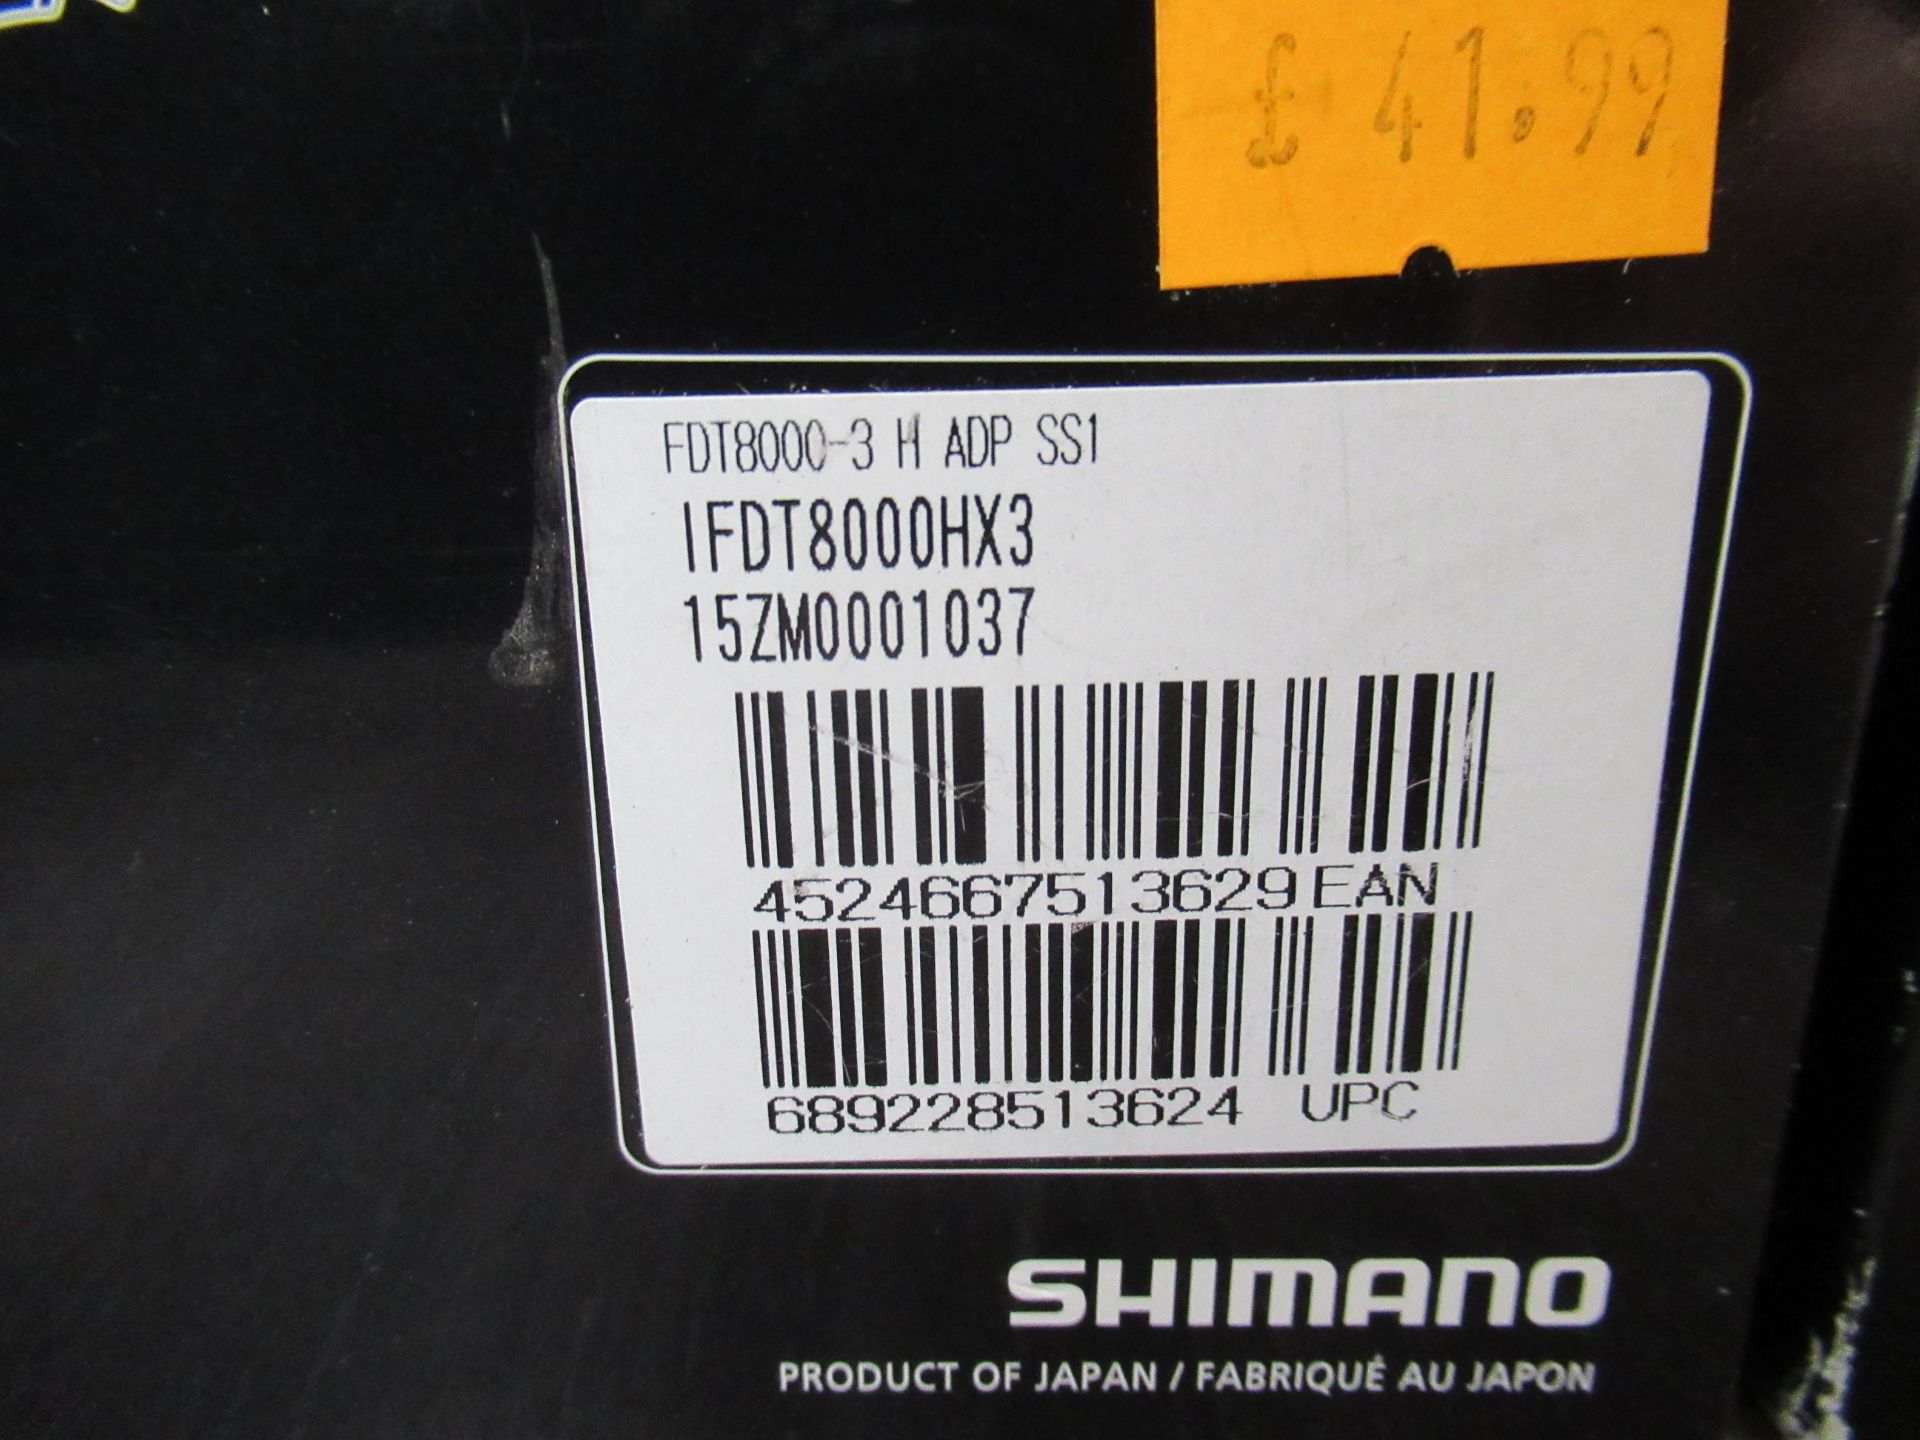 5 x Shimano Deore XT derailleurs to include models RD-T8000-SGS; FD-T8000-L-3; FD-T8000-H-3; RD-M781 - Image 3 of 6